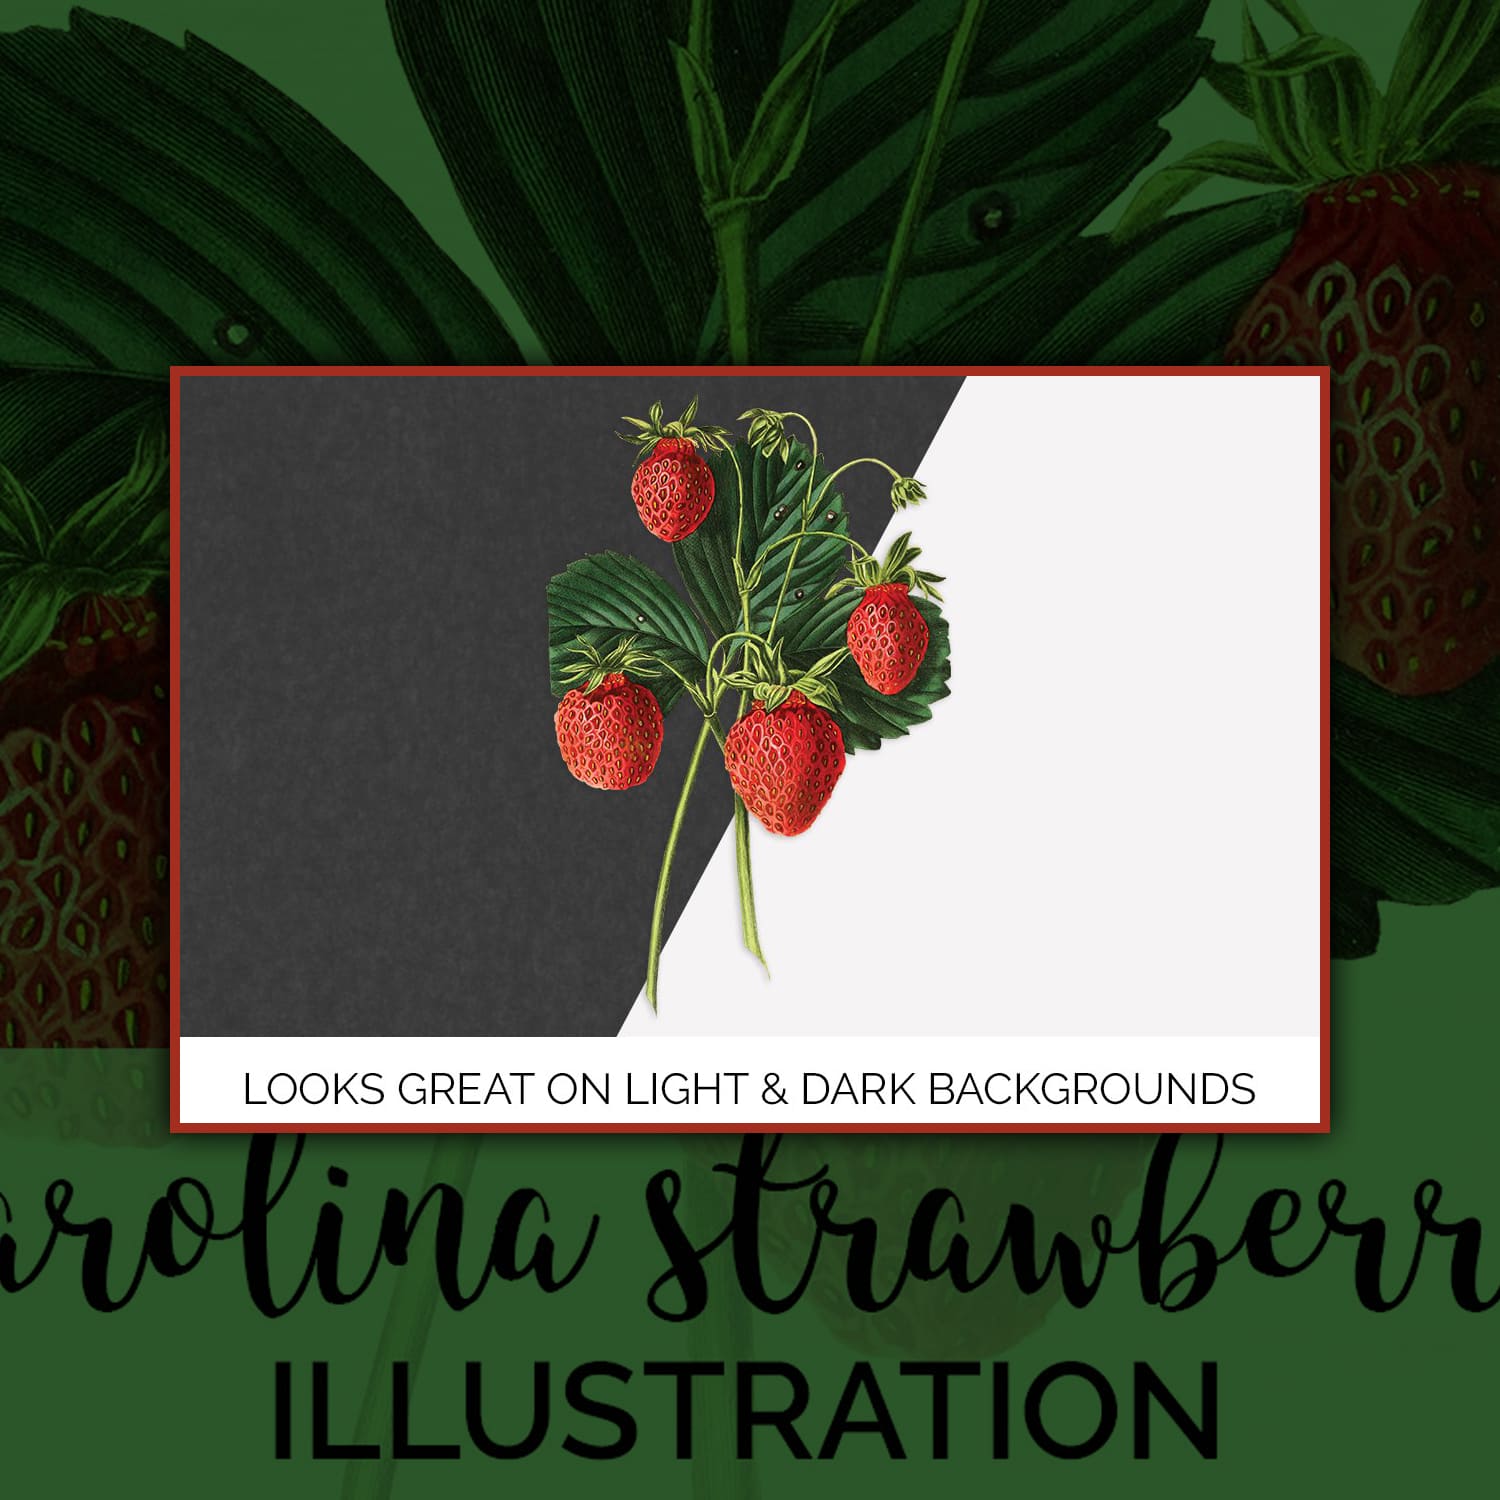 Illustration with red strawberries on a gray and white background.